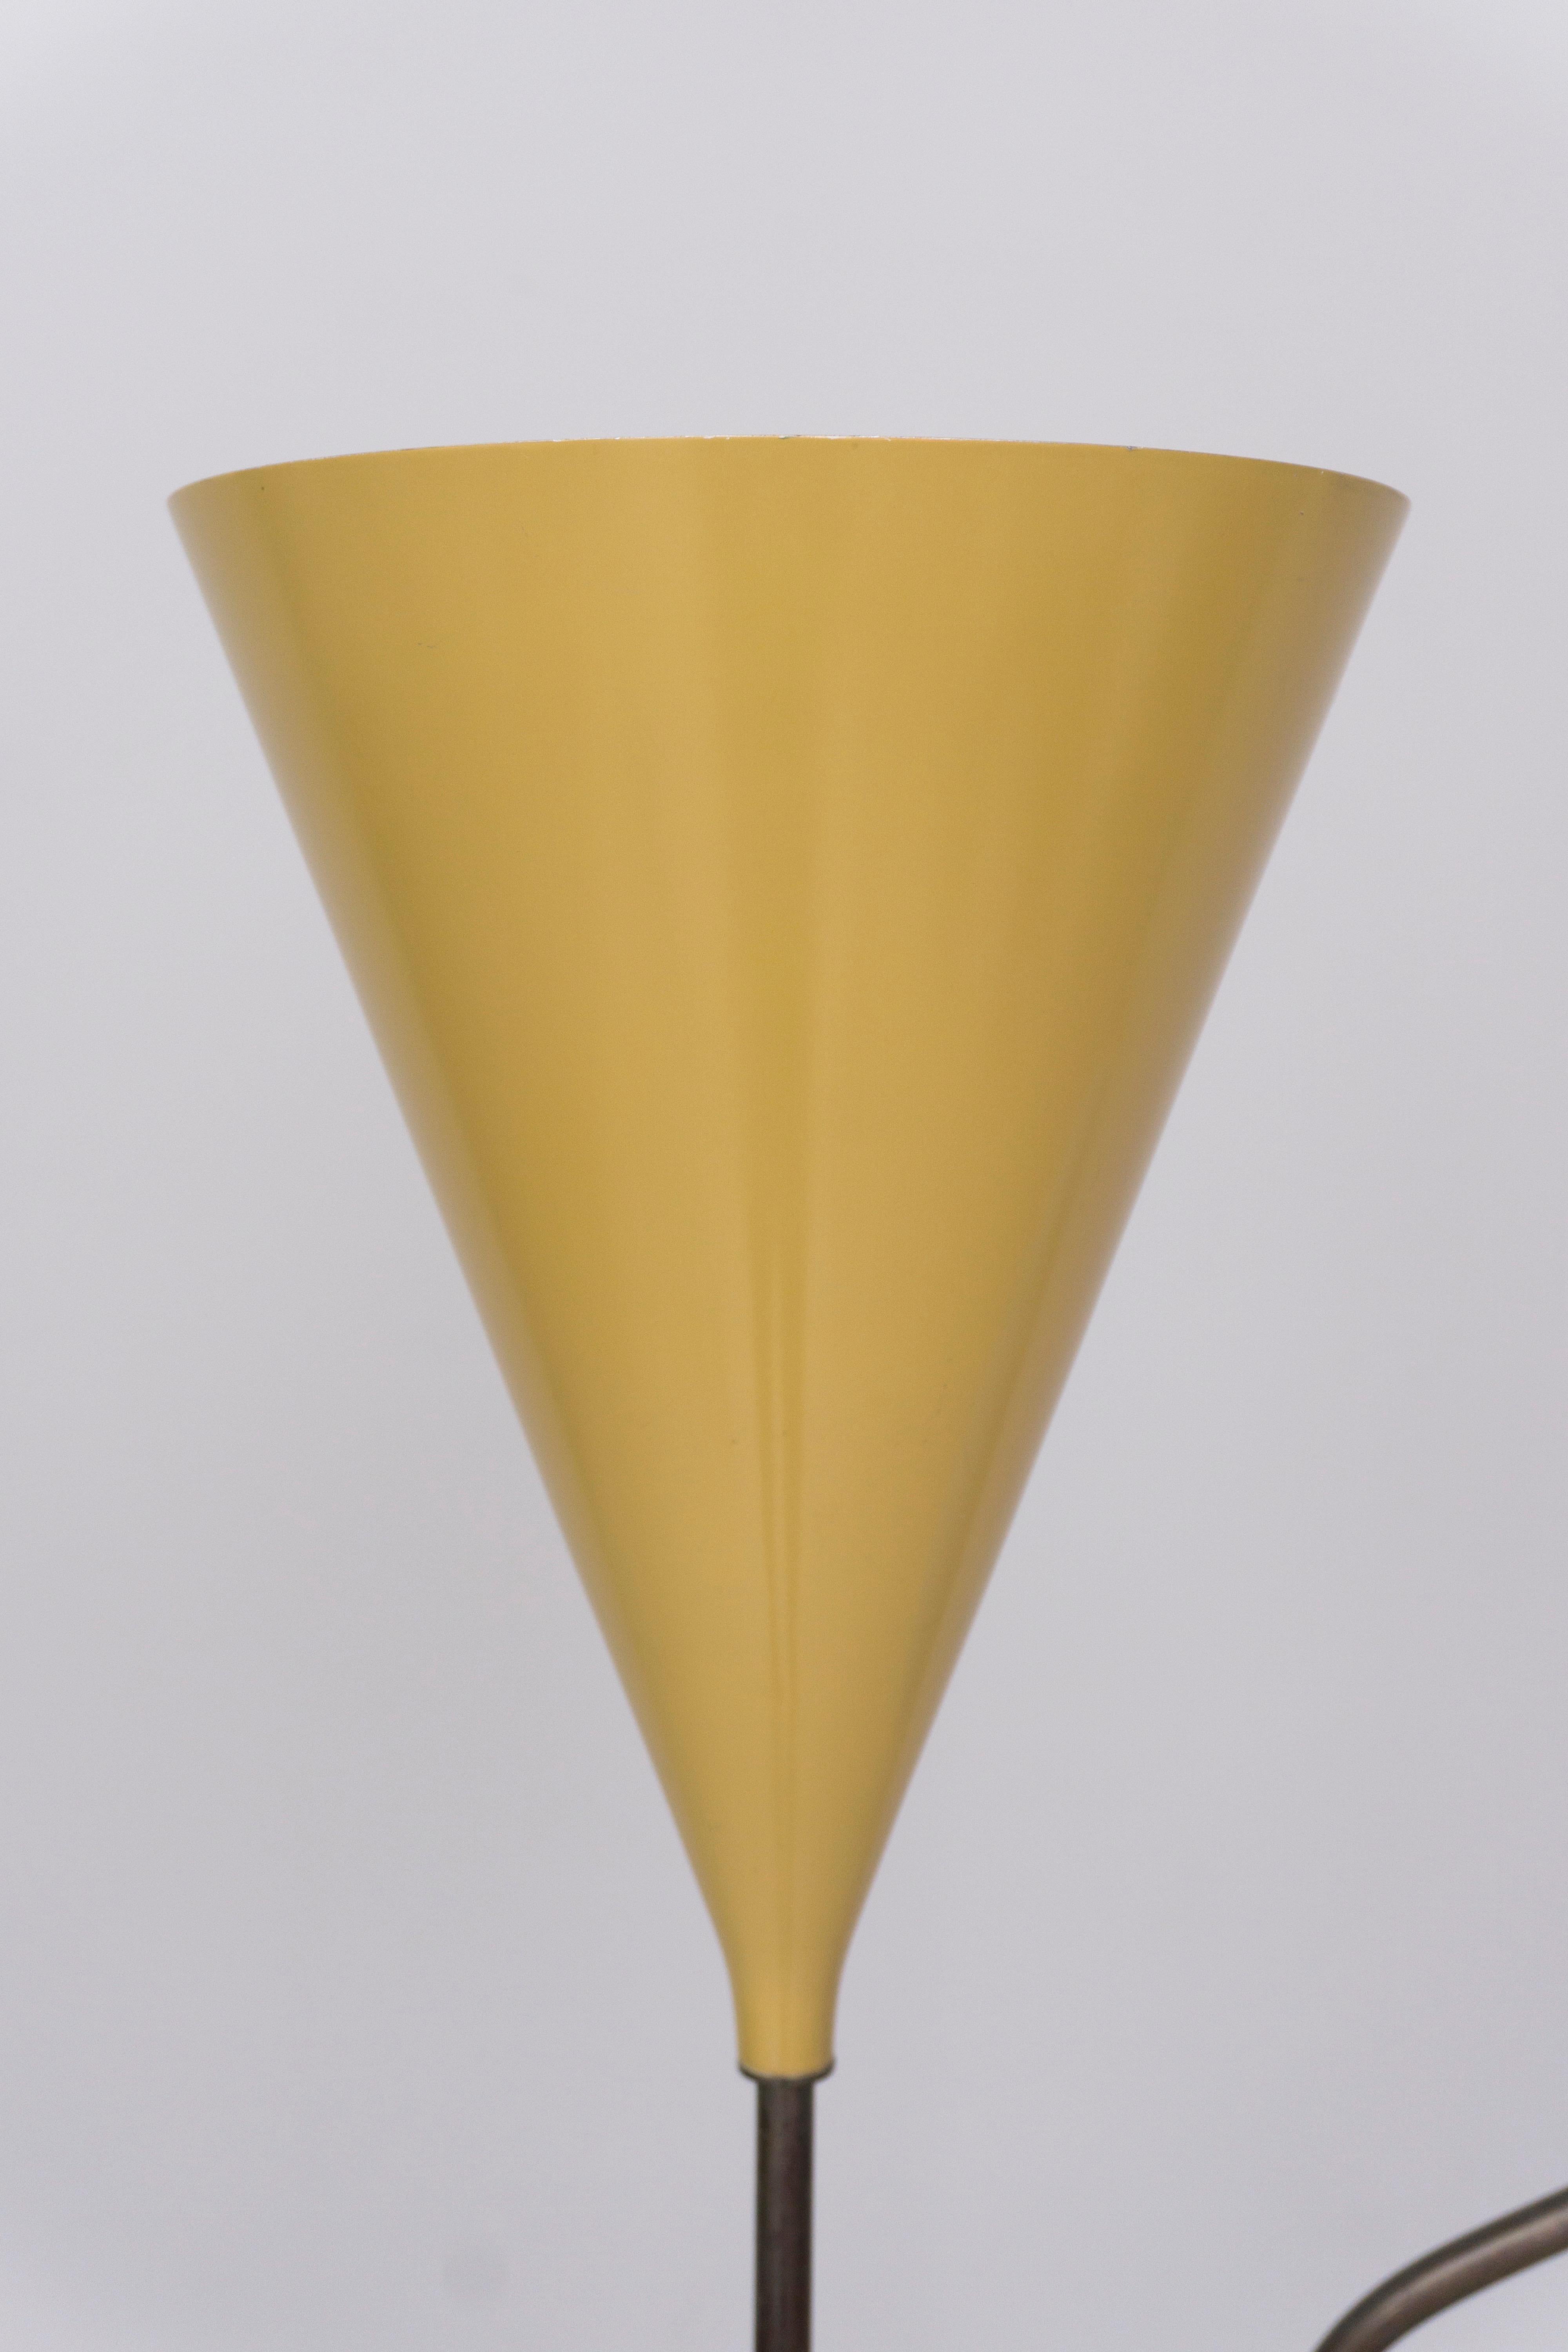 Lacquered Adjustable Floor Lamp, Brass, Aluminum by Giuseppe Ostuni / O-Luce, 1955 For Sale